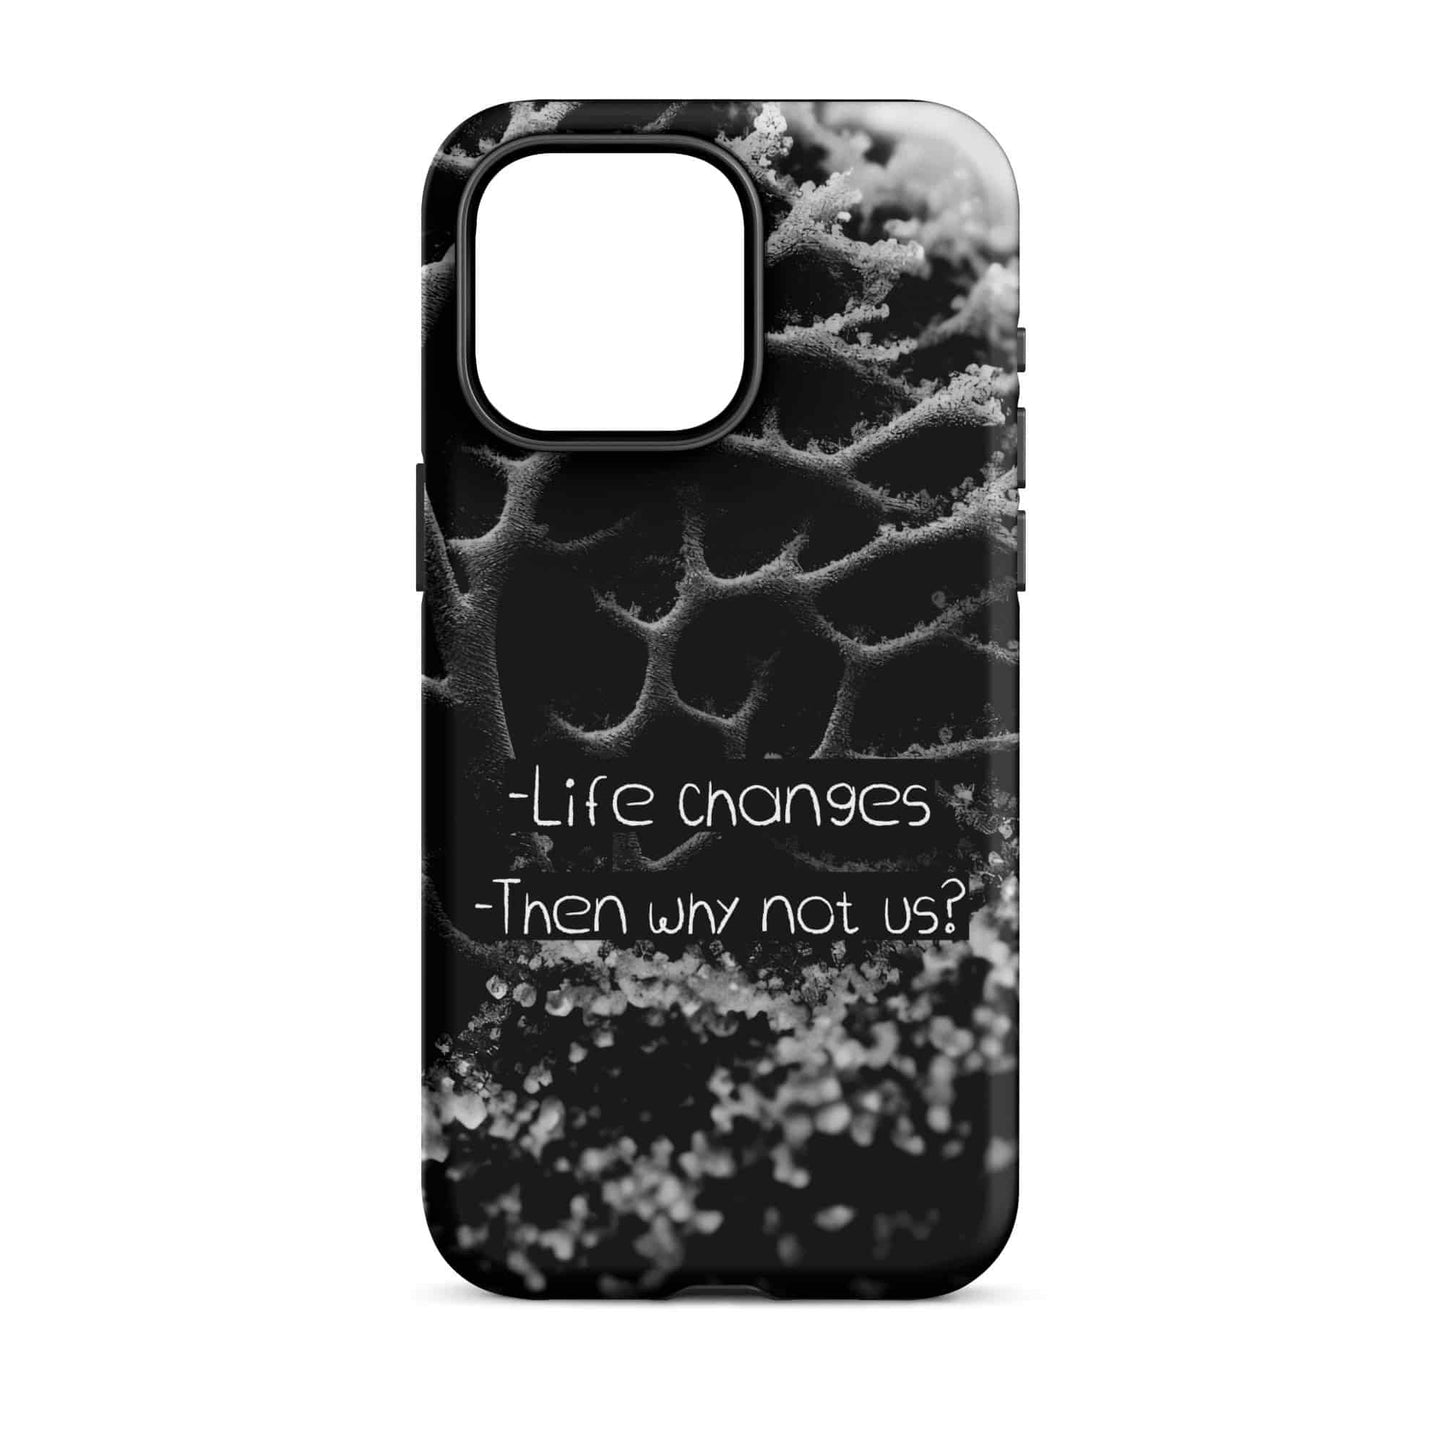 Life Changes - (Black Sand) Quoted iPhone Case